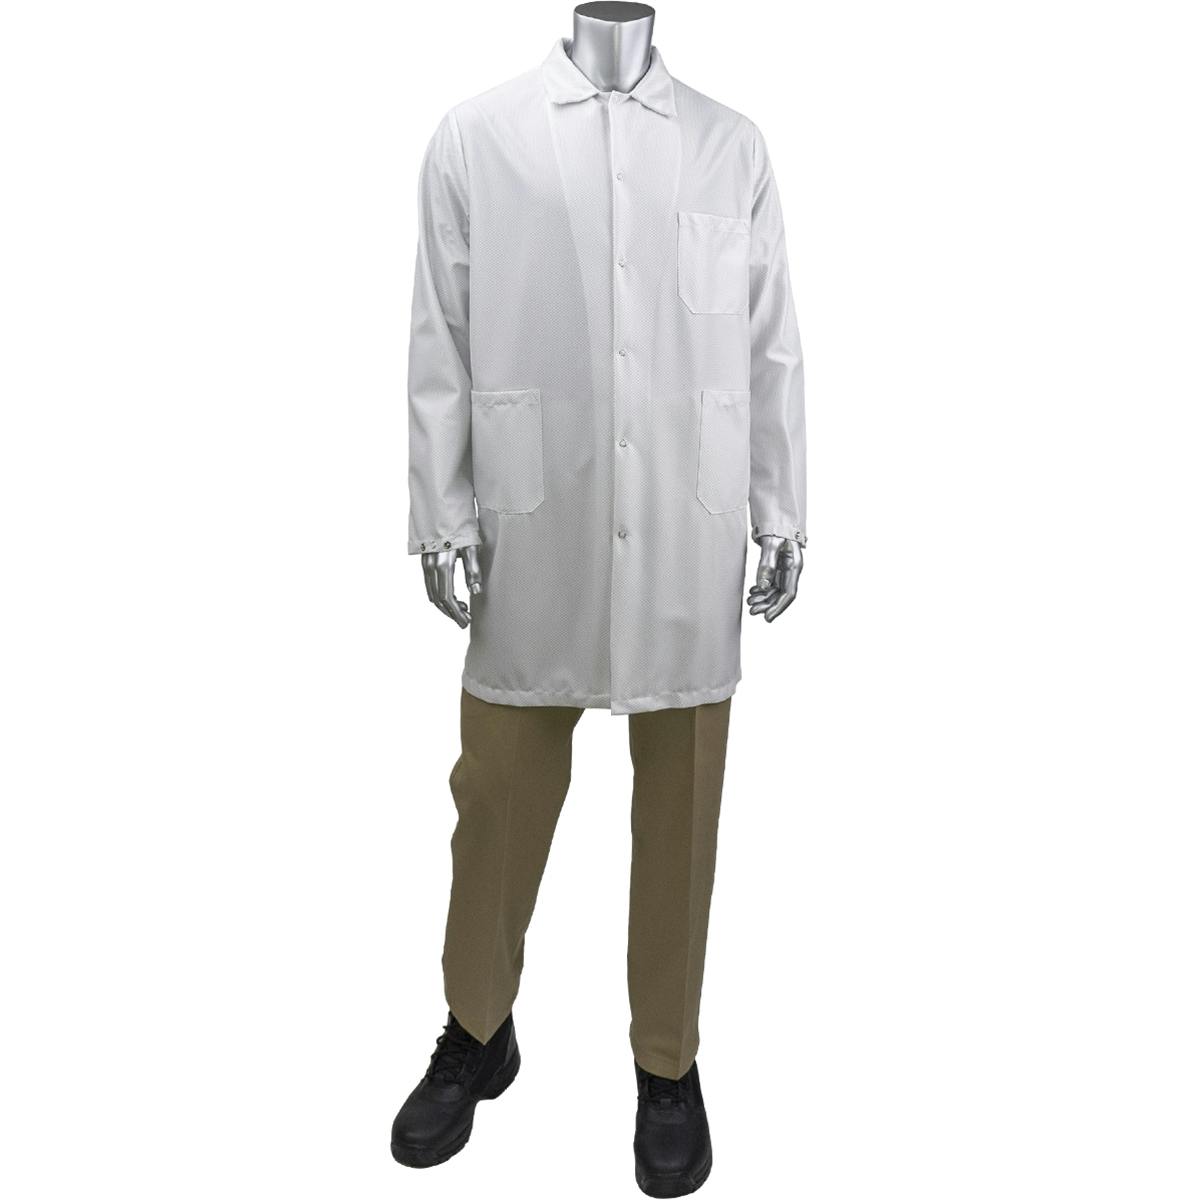 StatMaster Long ESD Labcoat, White (BR51-47WH)